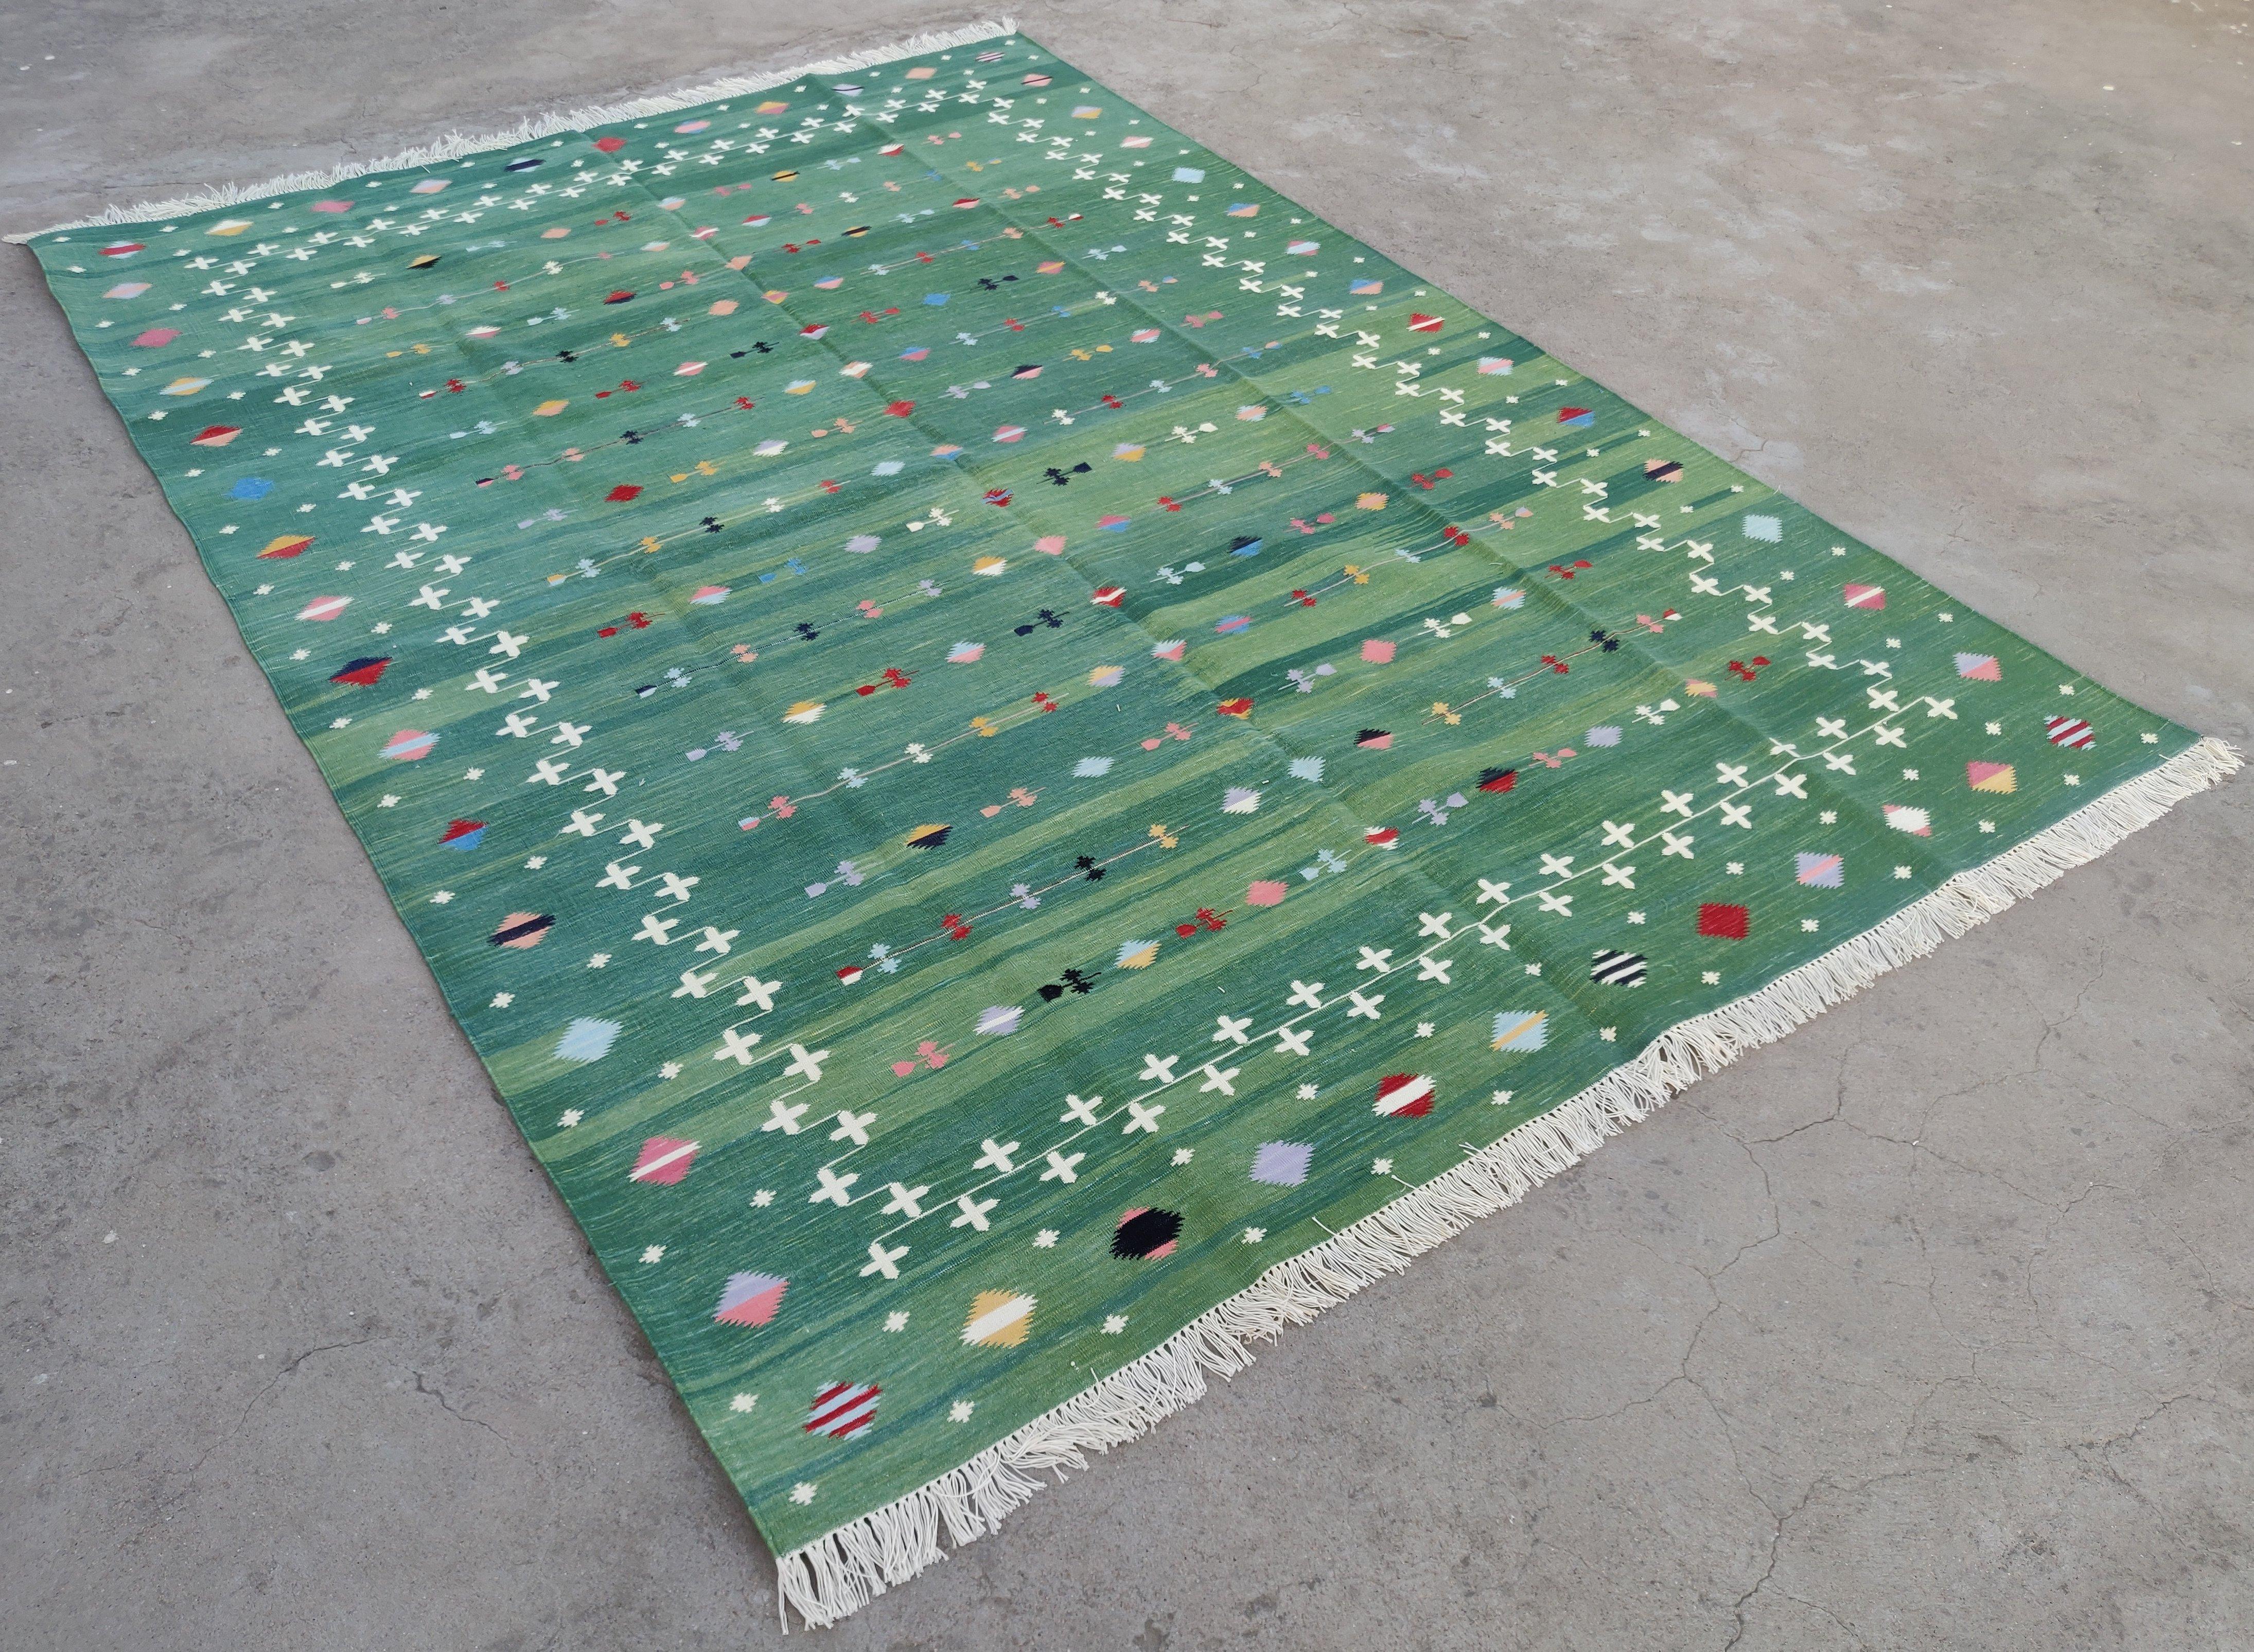 Cotton Vegetable Dyed Forest Green Shooting Star Rug-6'x9'
These special flat-weave dhurries are hand-woven with 15 ply 100% cotton yarn. Due to the special manufacturing techniques used to create our rugs, the size and color of each piece may vary